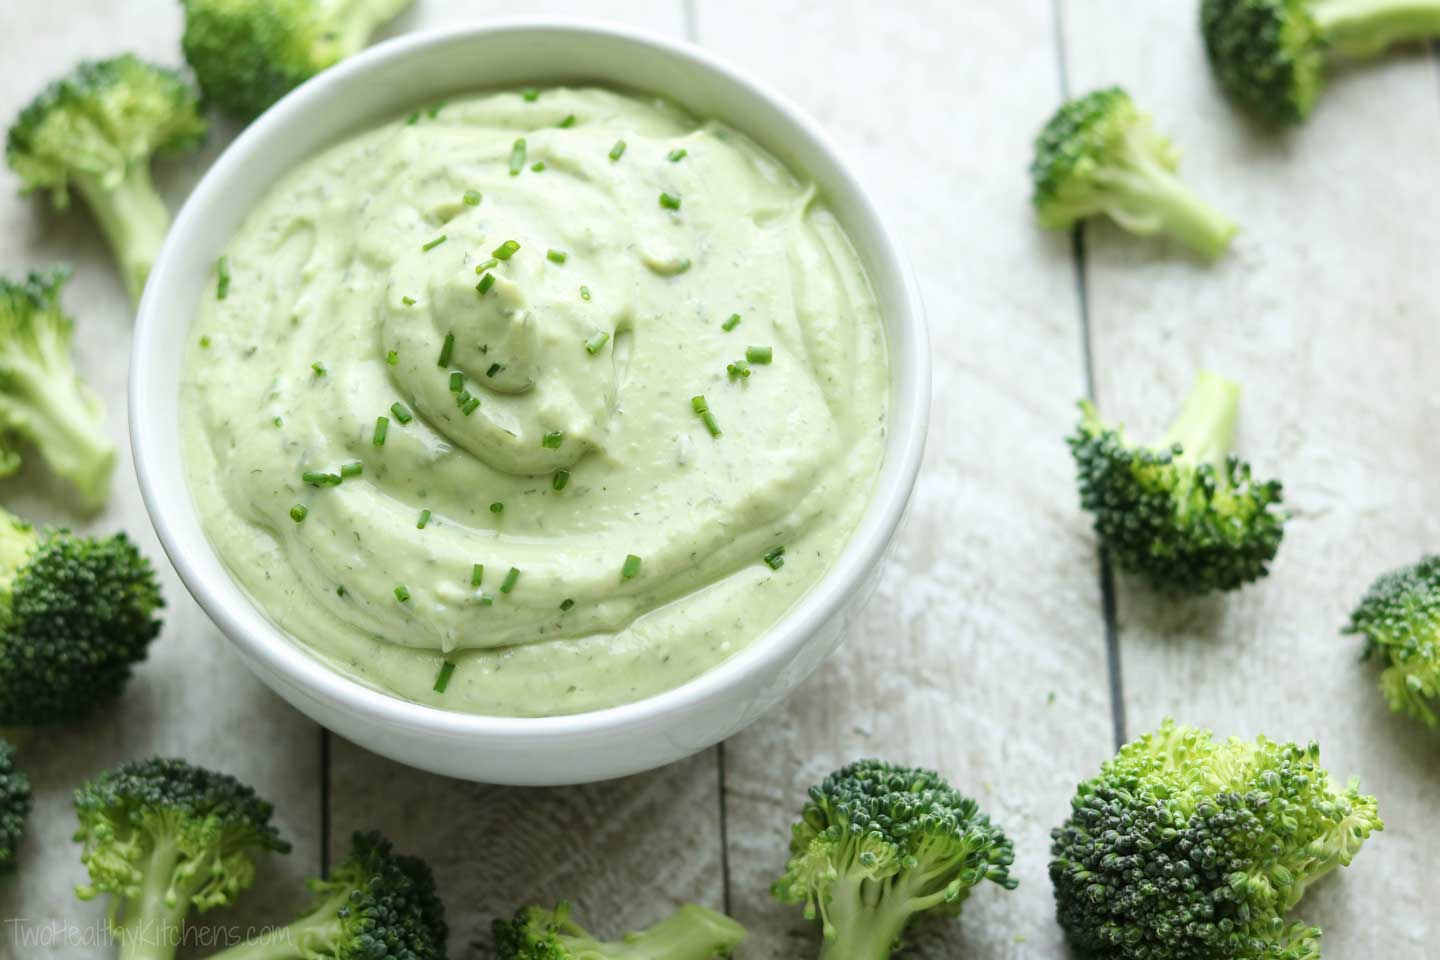 bowl of ranch dip surrounded by scattered broccoli florets